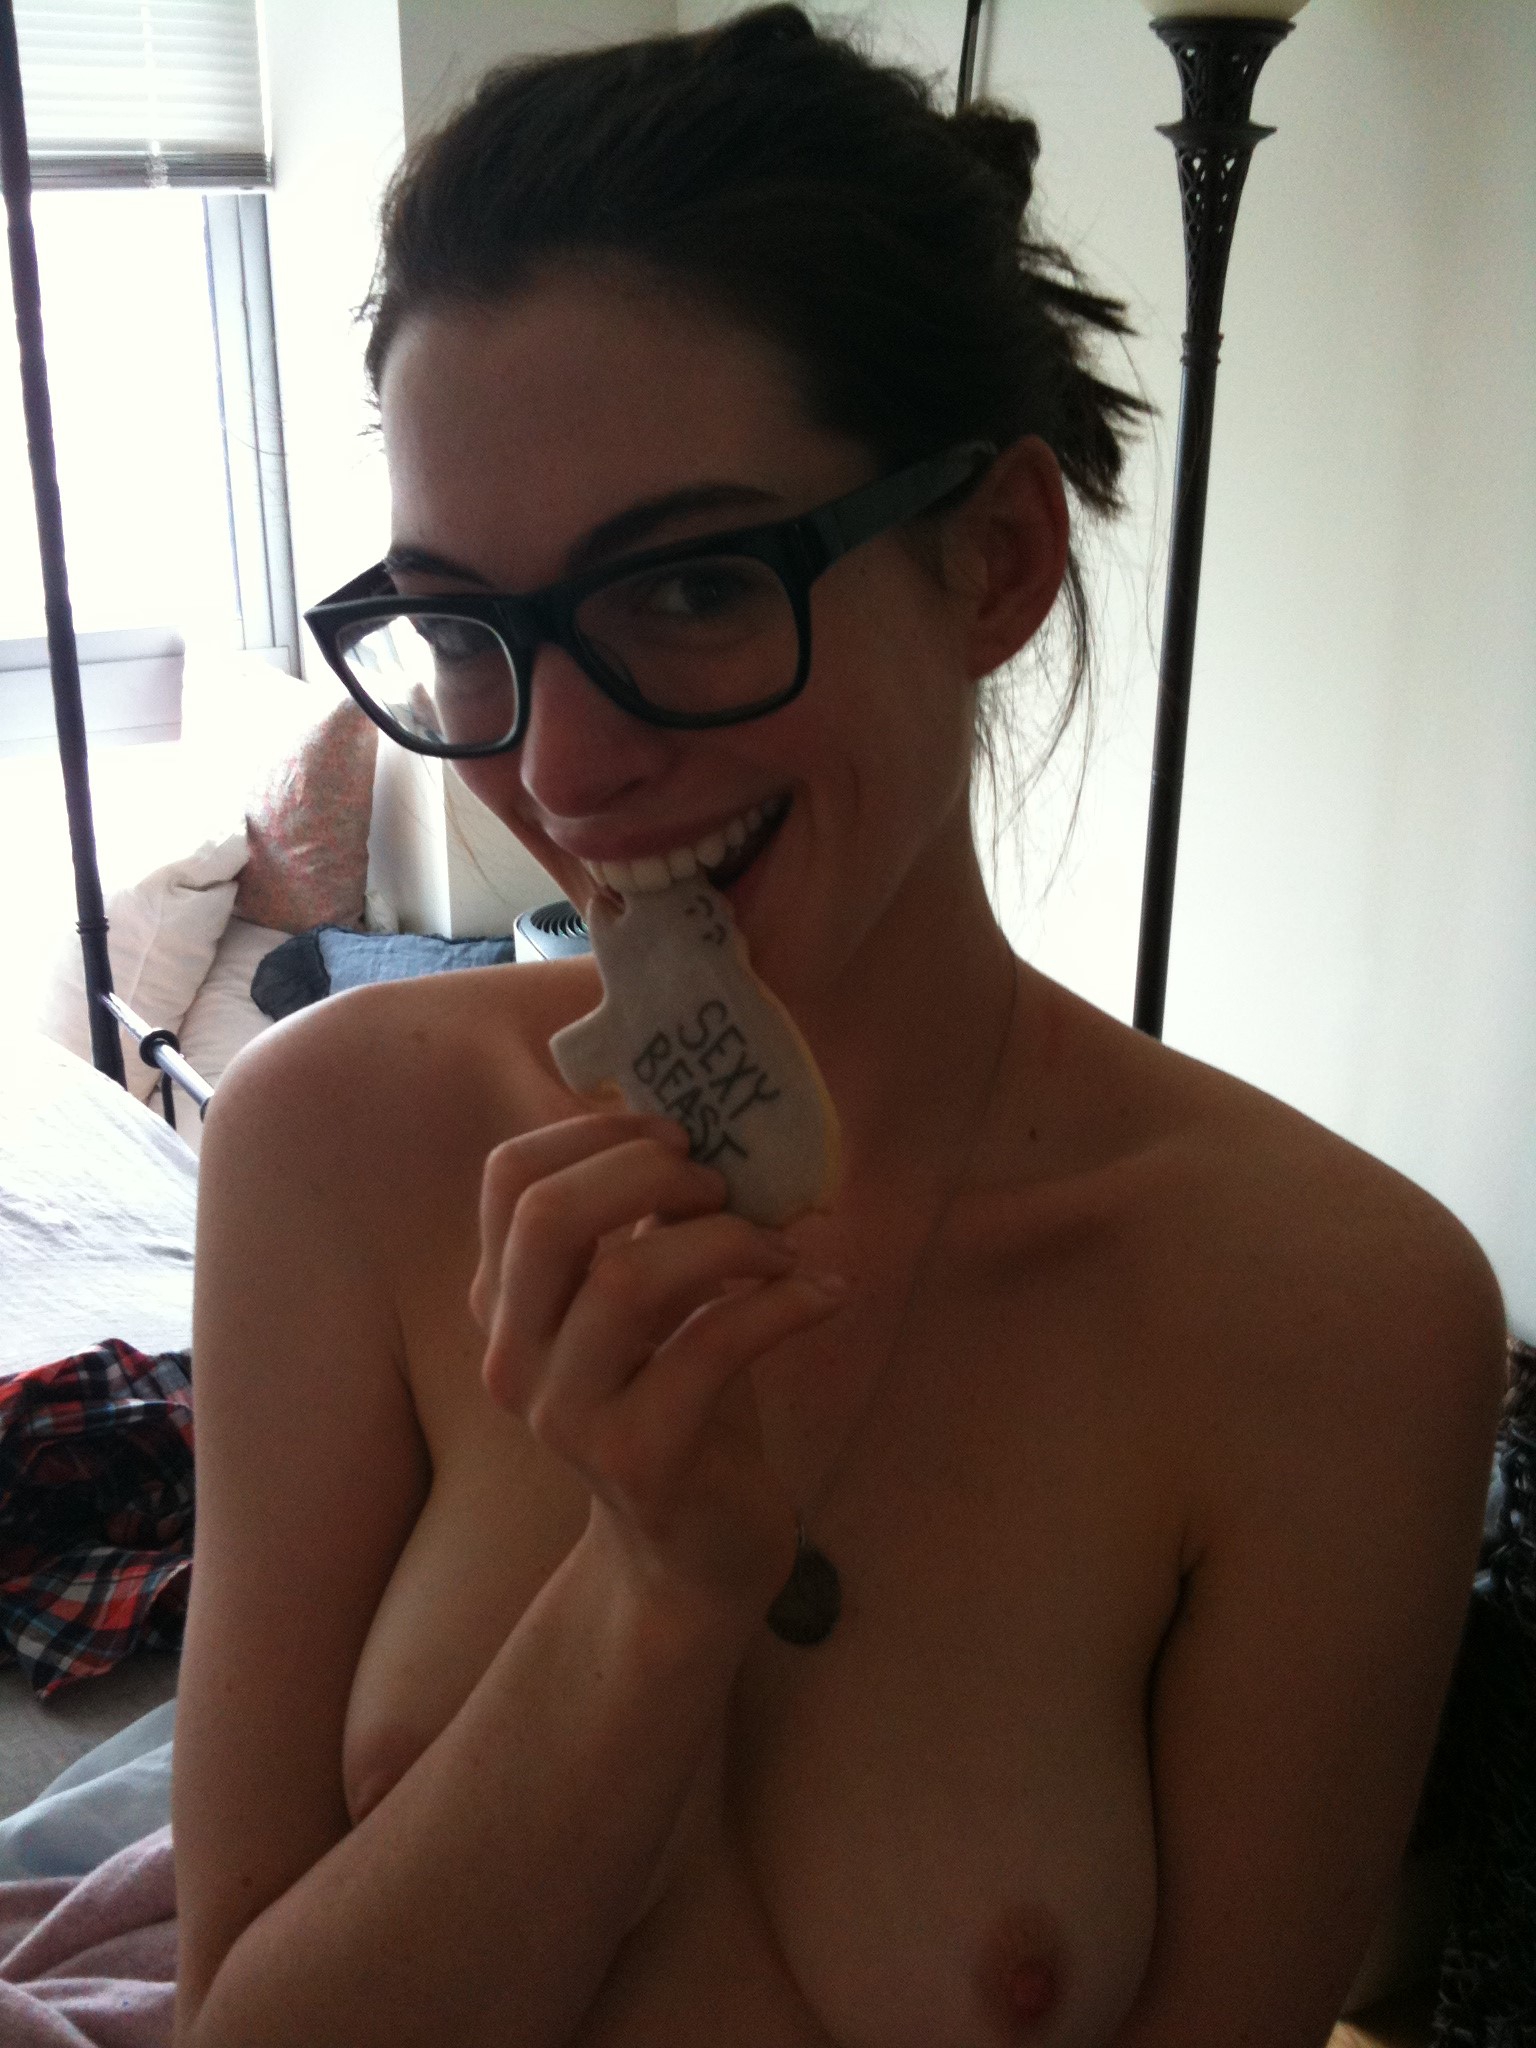 Anne Hathaway Anna Kendrick Porn Captions - Full iCloud Leak: Anne Hathaway Naked Pics & Videos - NEW!